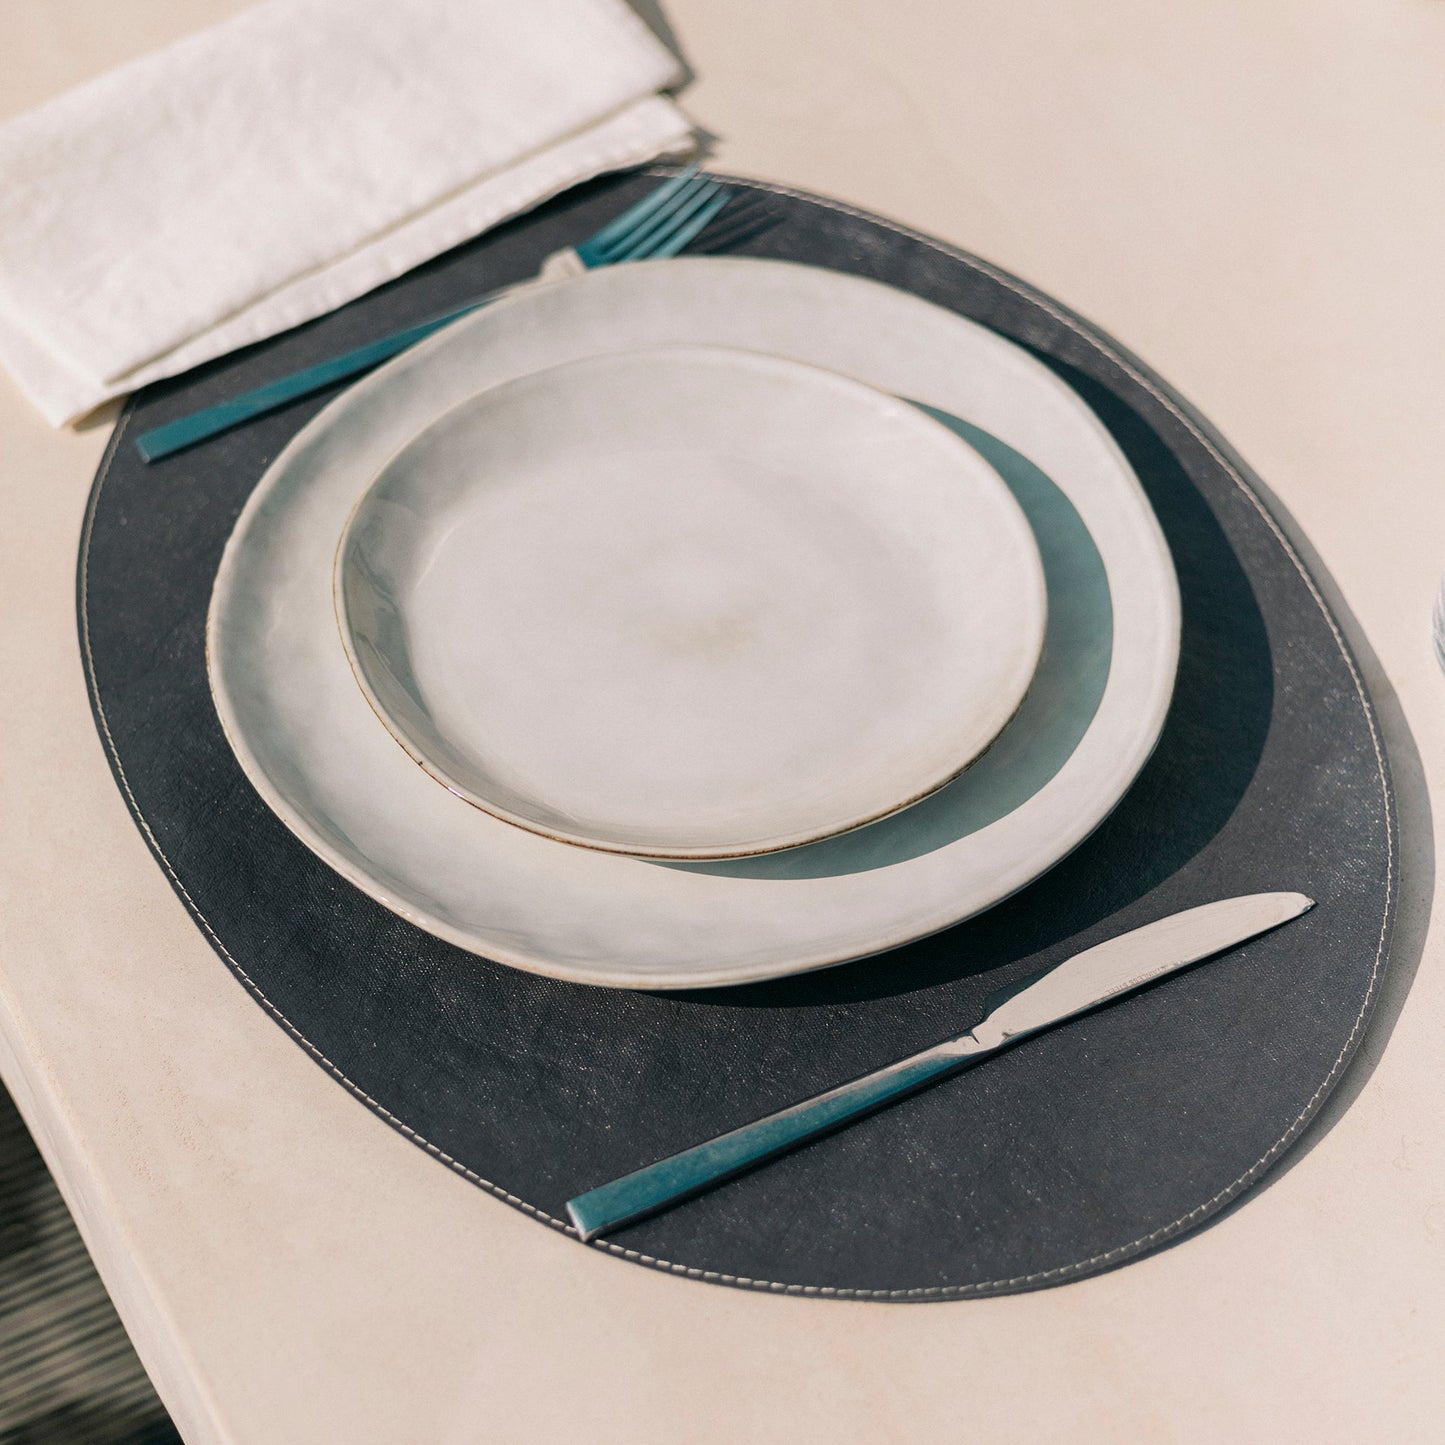 A place setting is shown on a white outdoor dining table. A dark grey oval washable paper placemat is shown with two white stoneware plates stacked on top. A fork and knife are shown beside the plates, and a white linen napkin is also resting on the placemat.